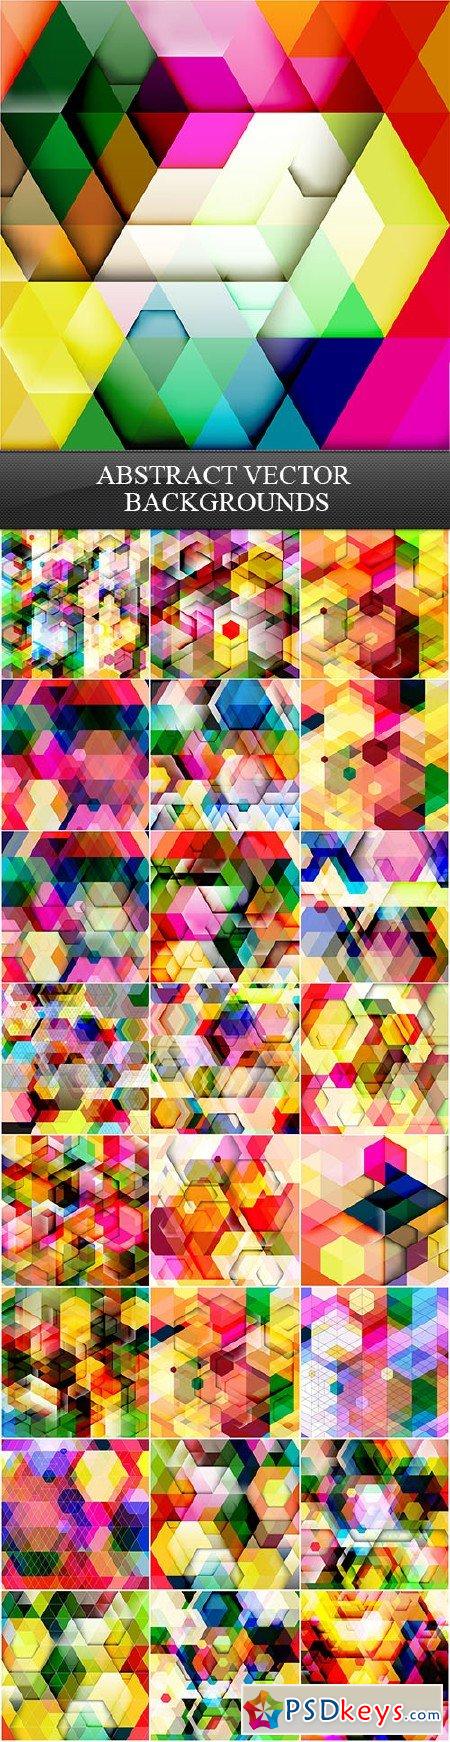 Abstract Vector Backgrounds 25xEPS